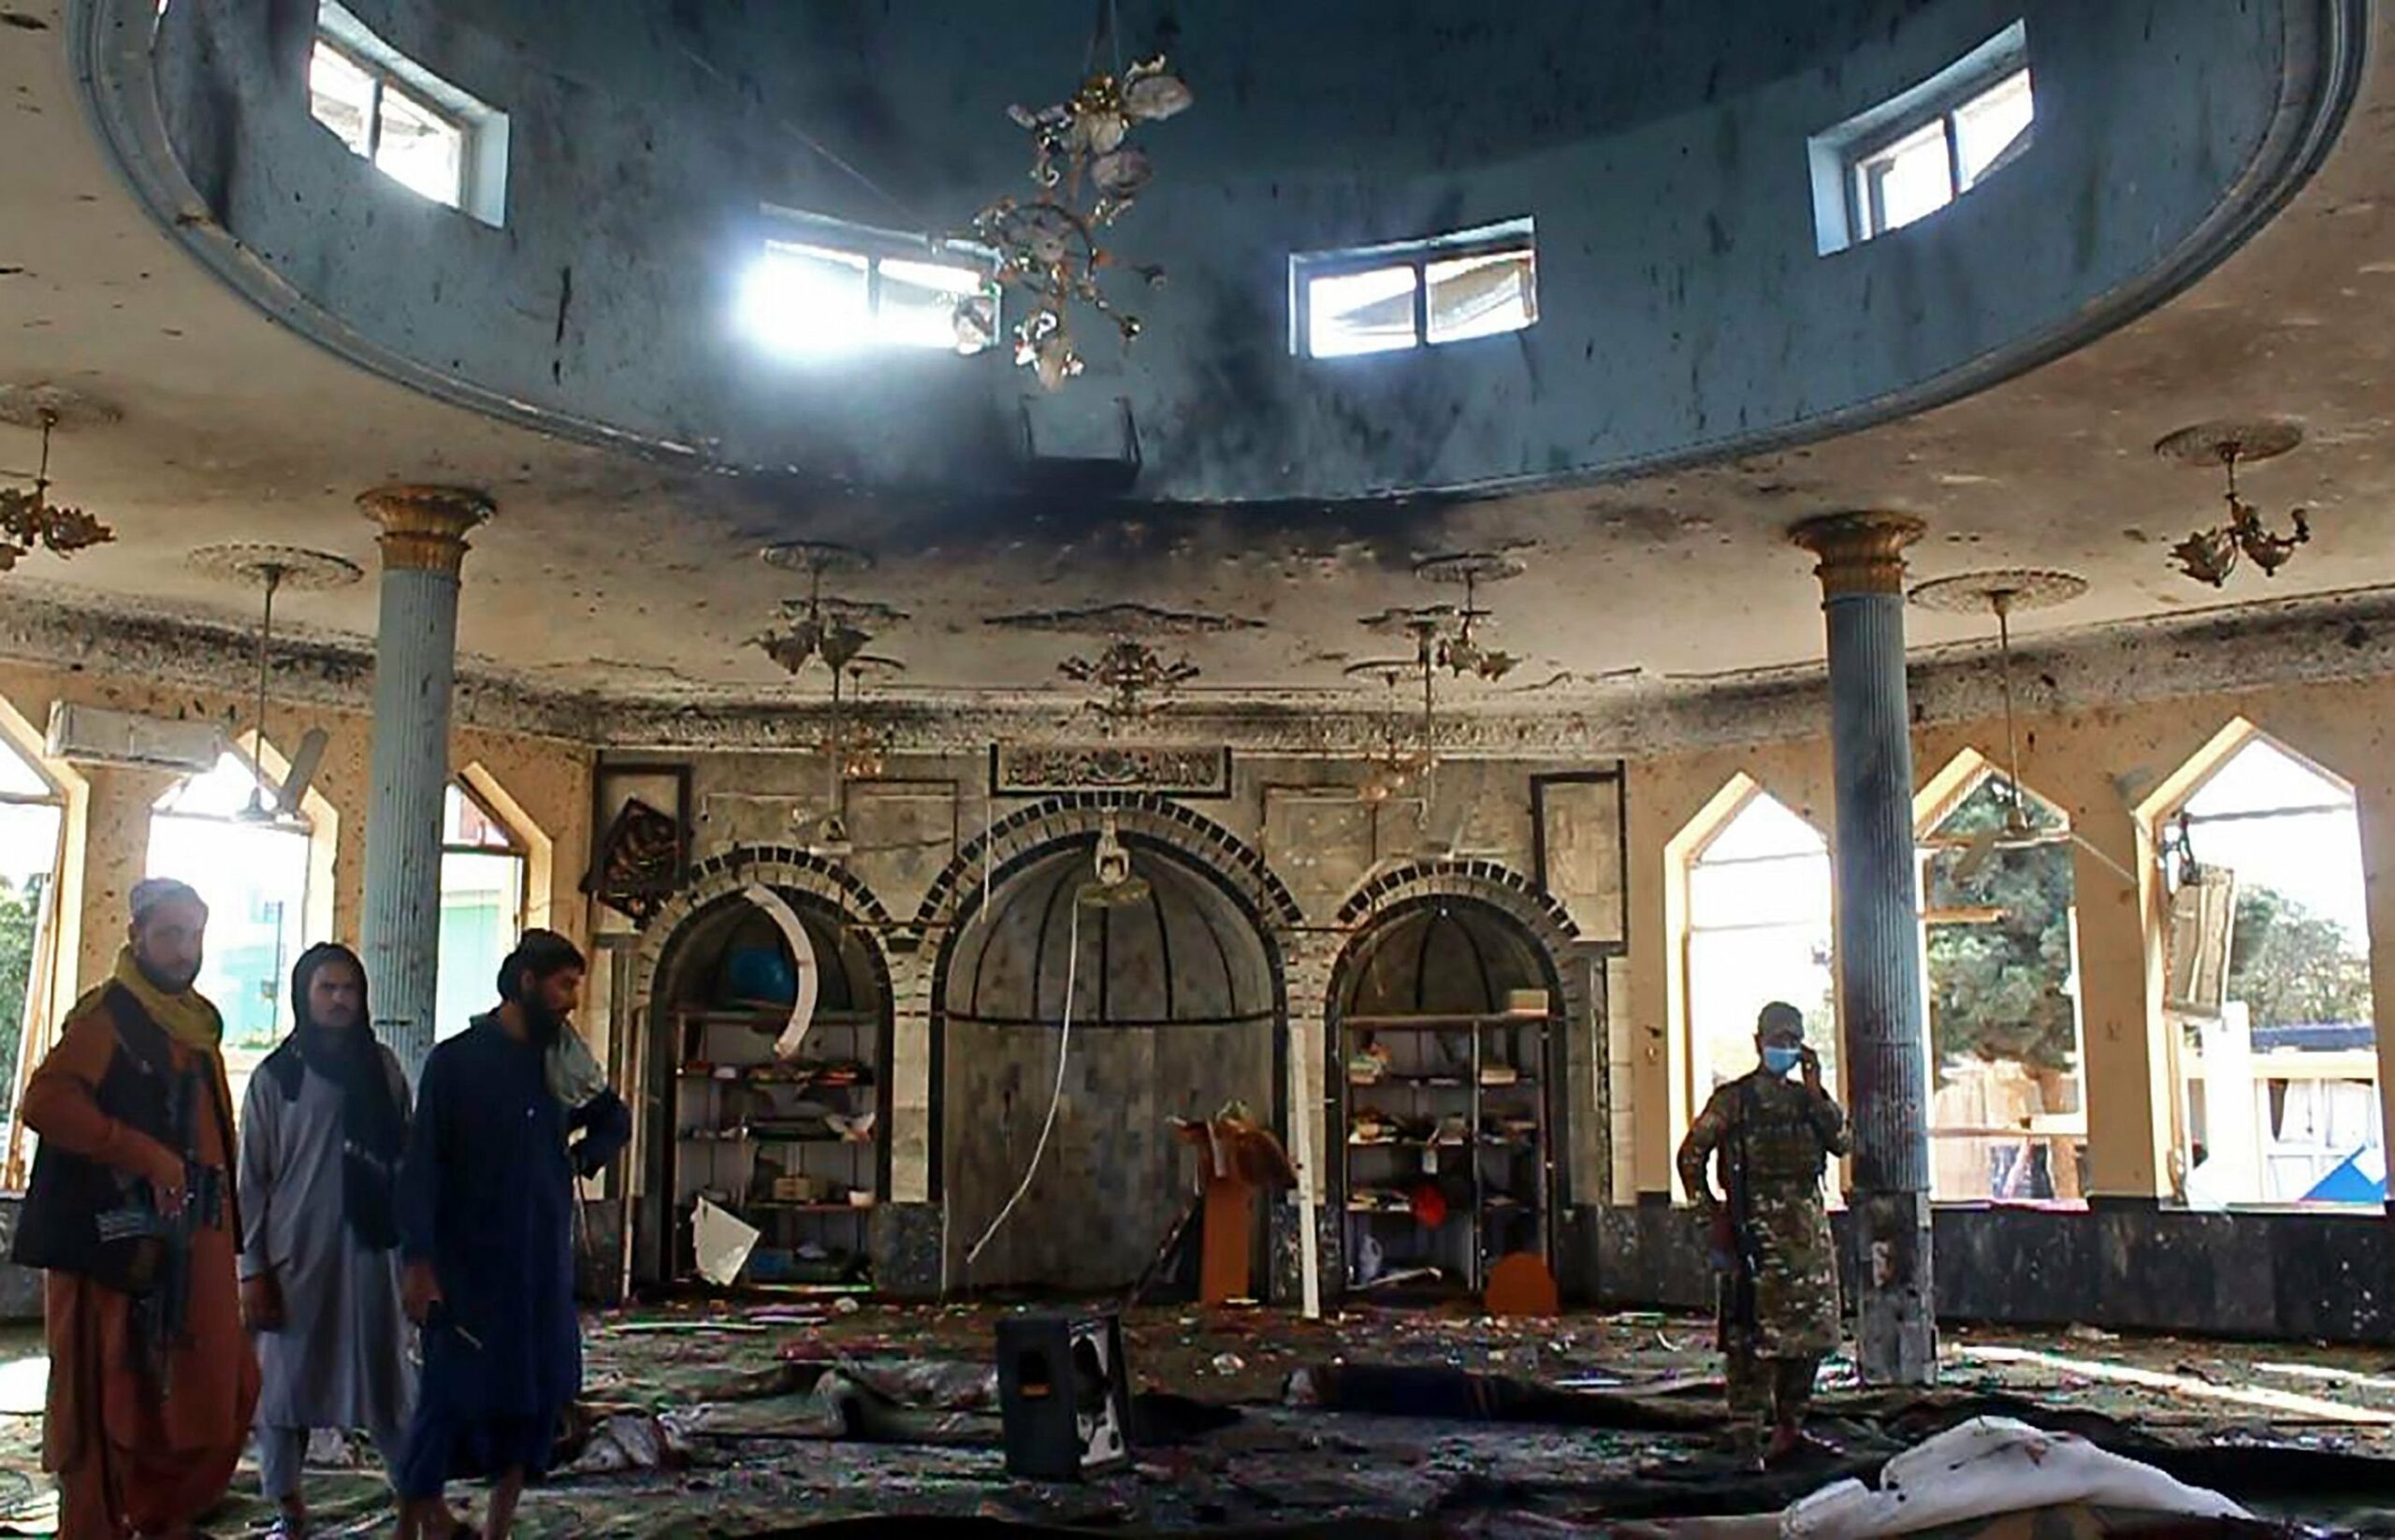 Taliban fighters investigate inside a Shiite mosque after a suicide bomb attack in Kunduz, Oct. 8, 2021